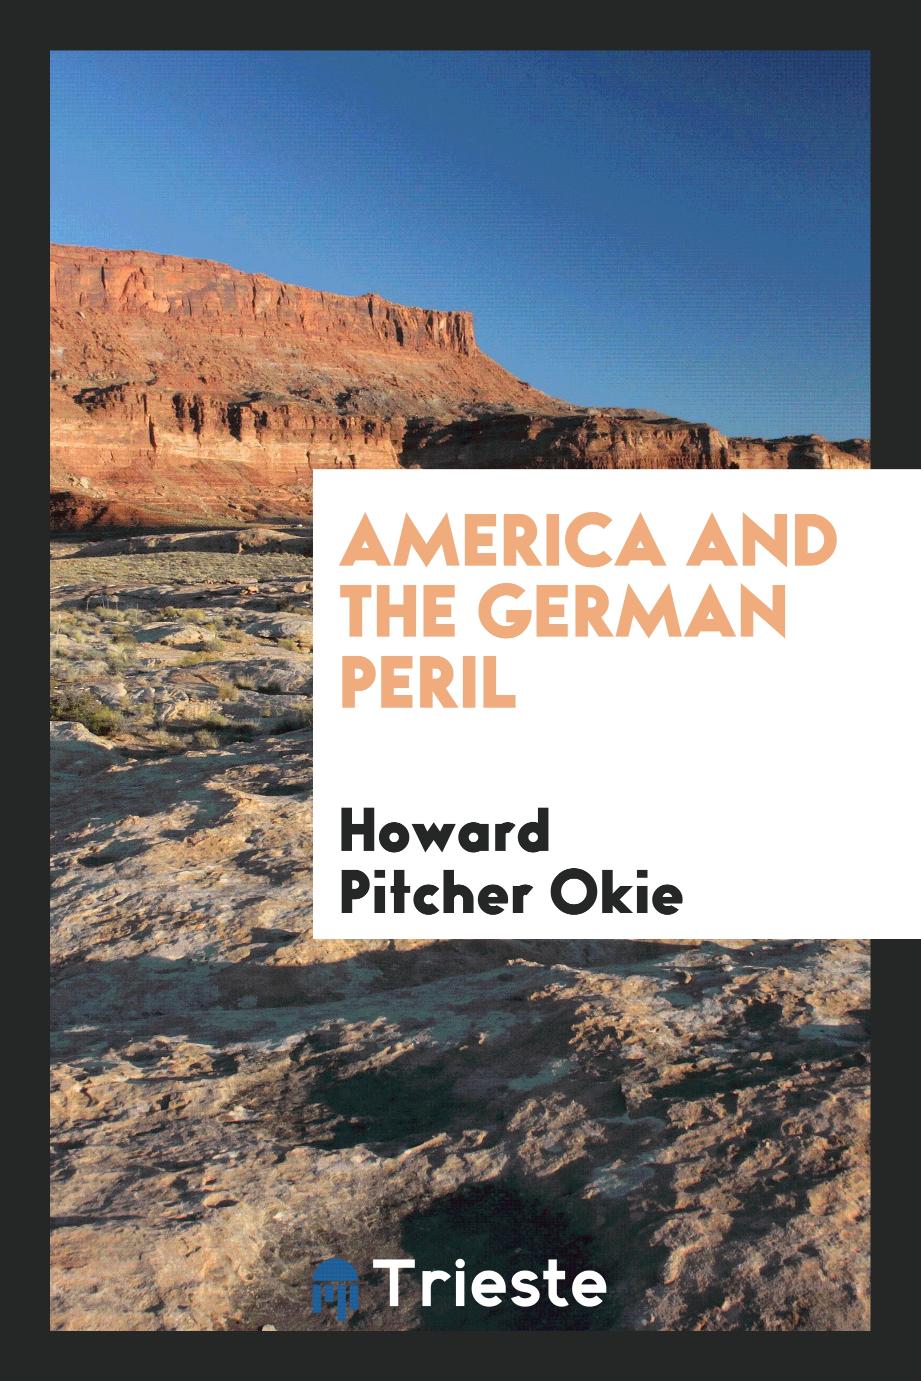 America and the German peril